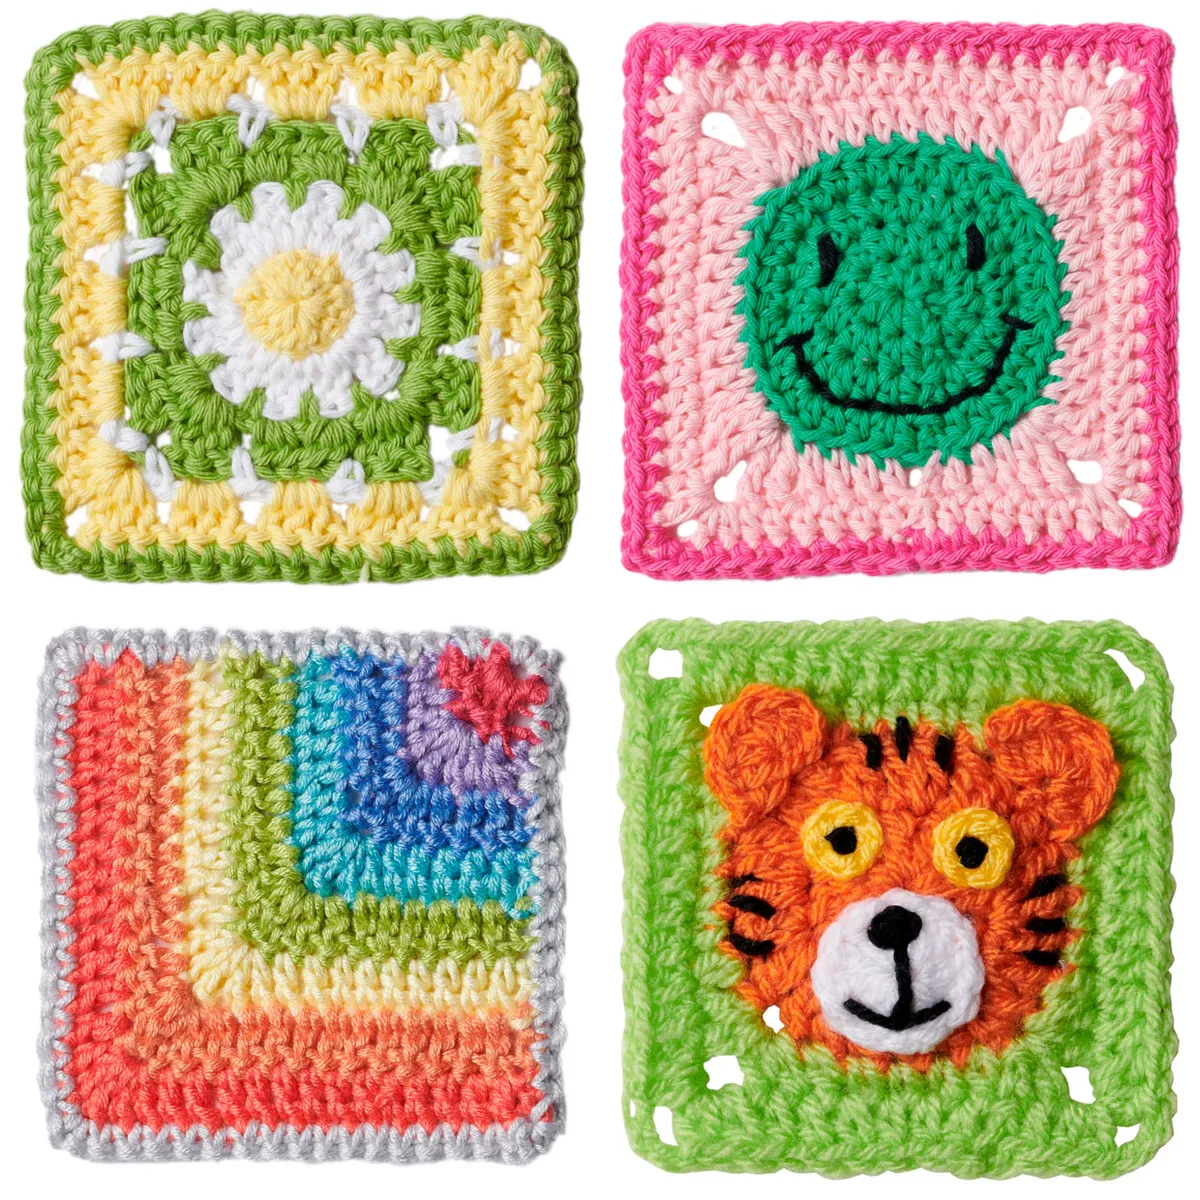 Easy 3D Granny Square Ideas: Simple 3D Granny Square Patterns Step By Step